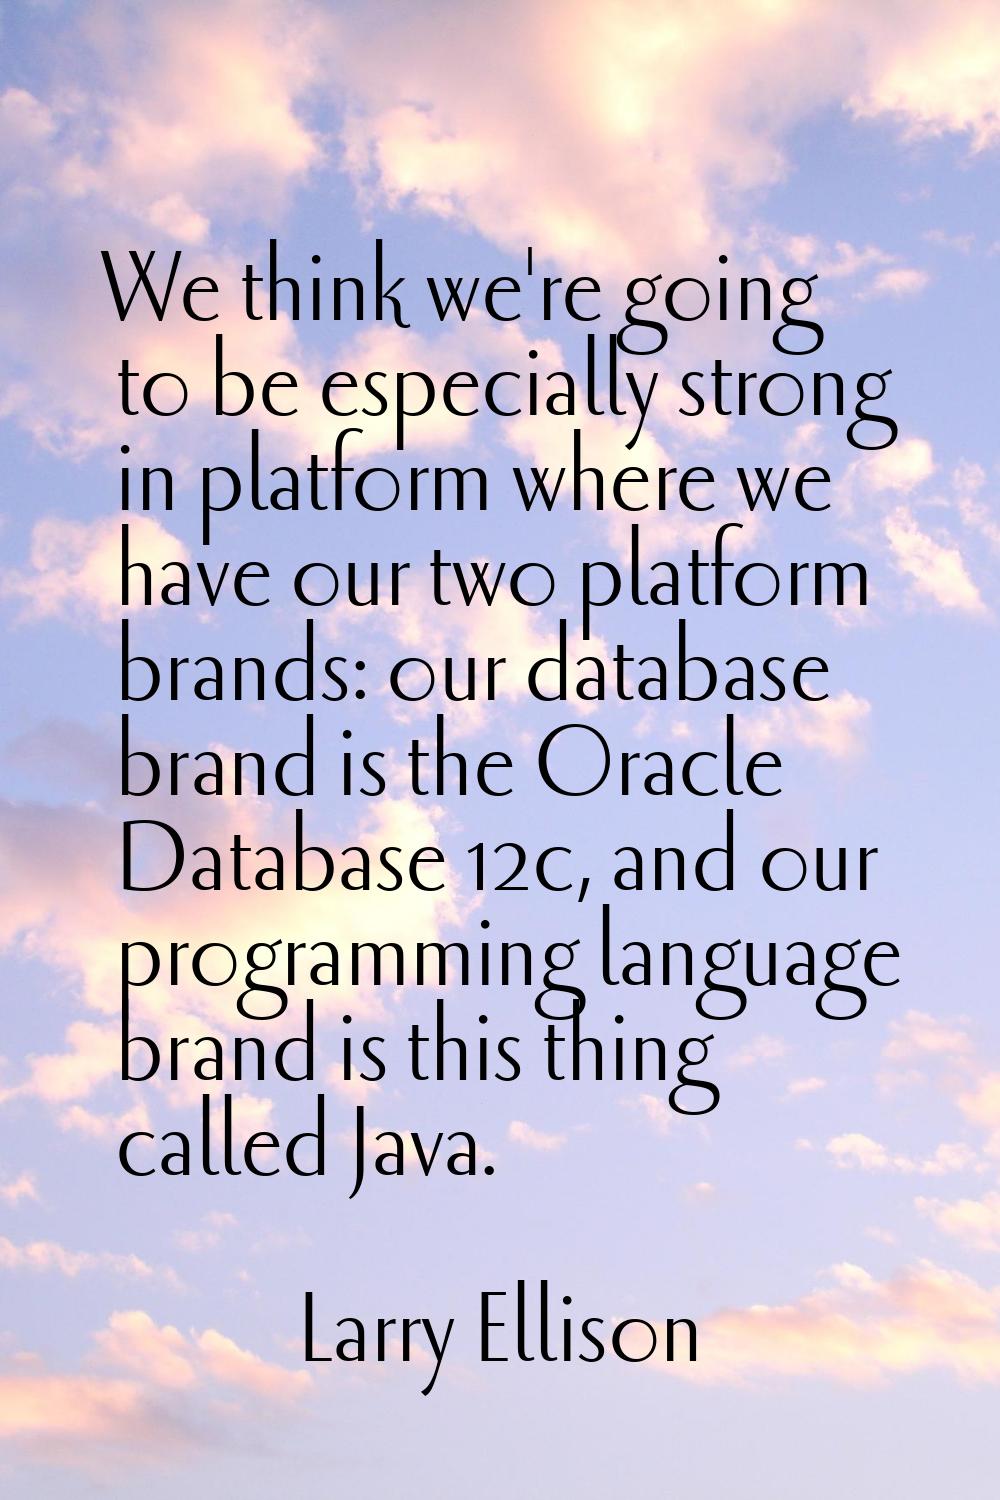 We think we're going to be especially strong in platform where we have our two platform brands: our